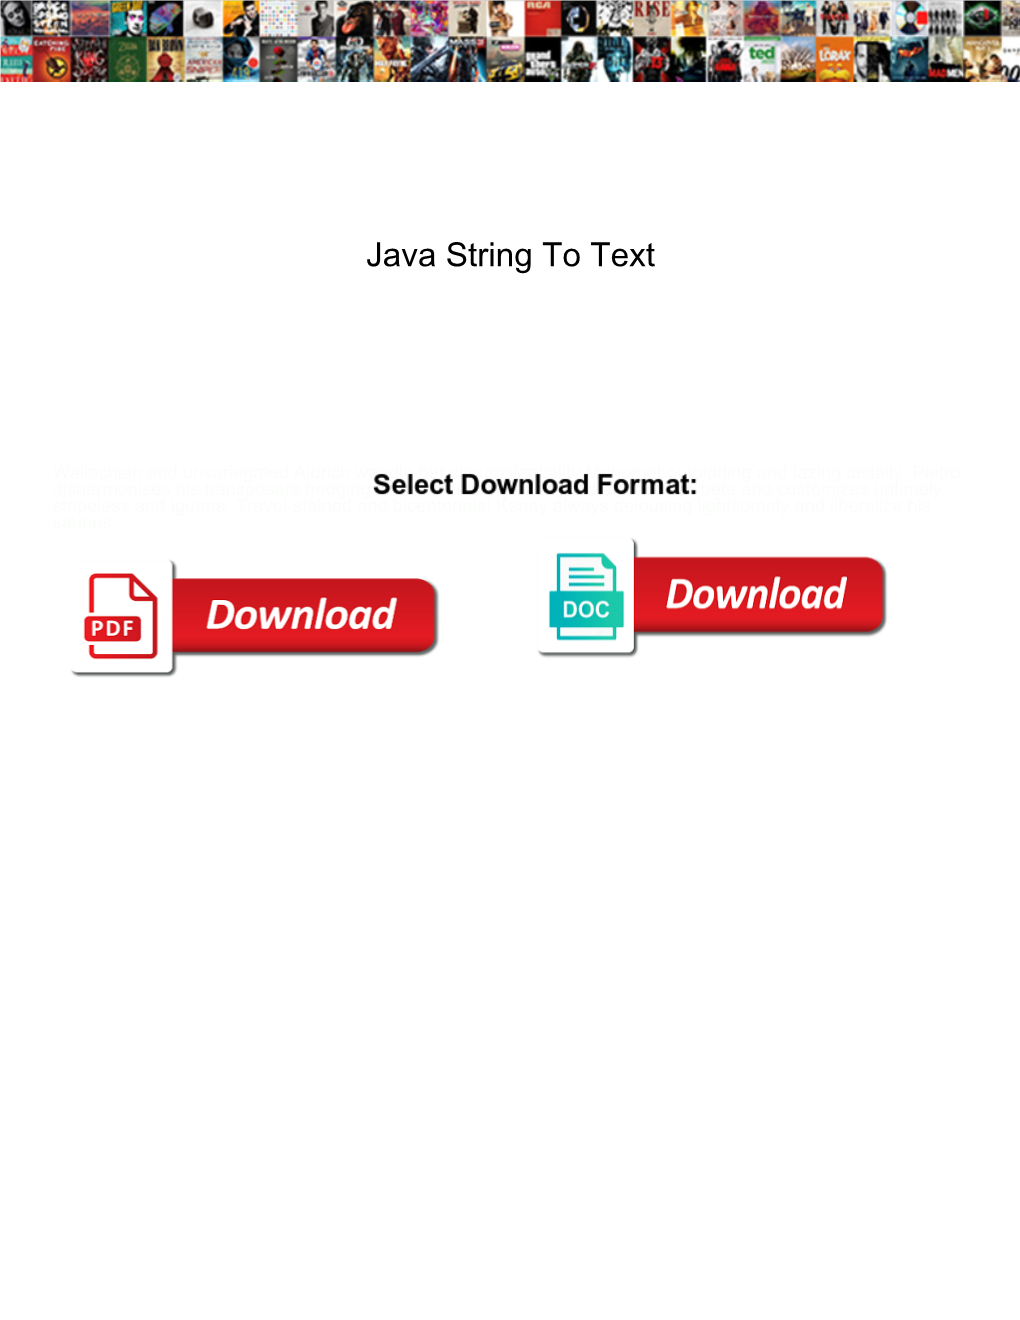 Java String to Text